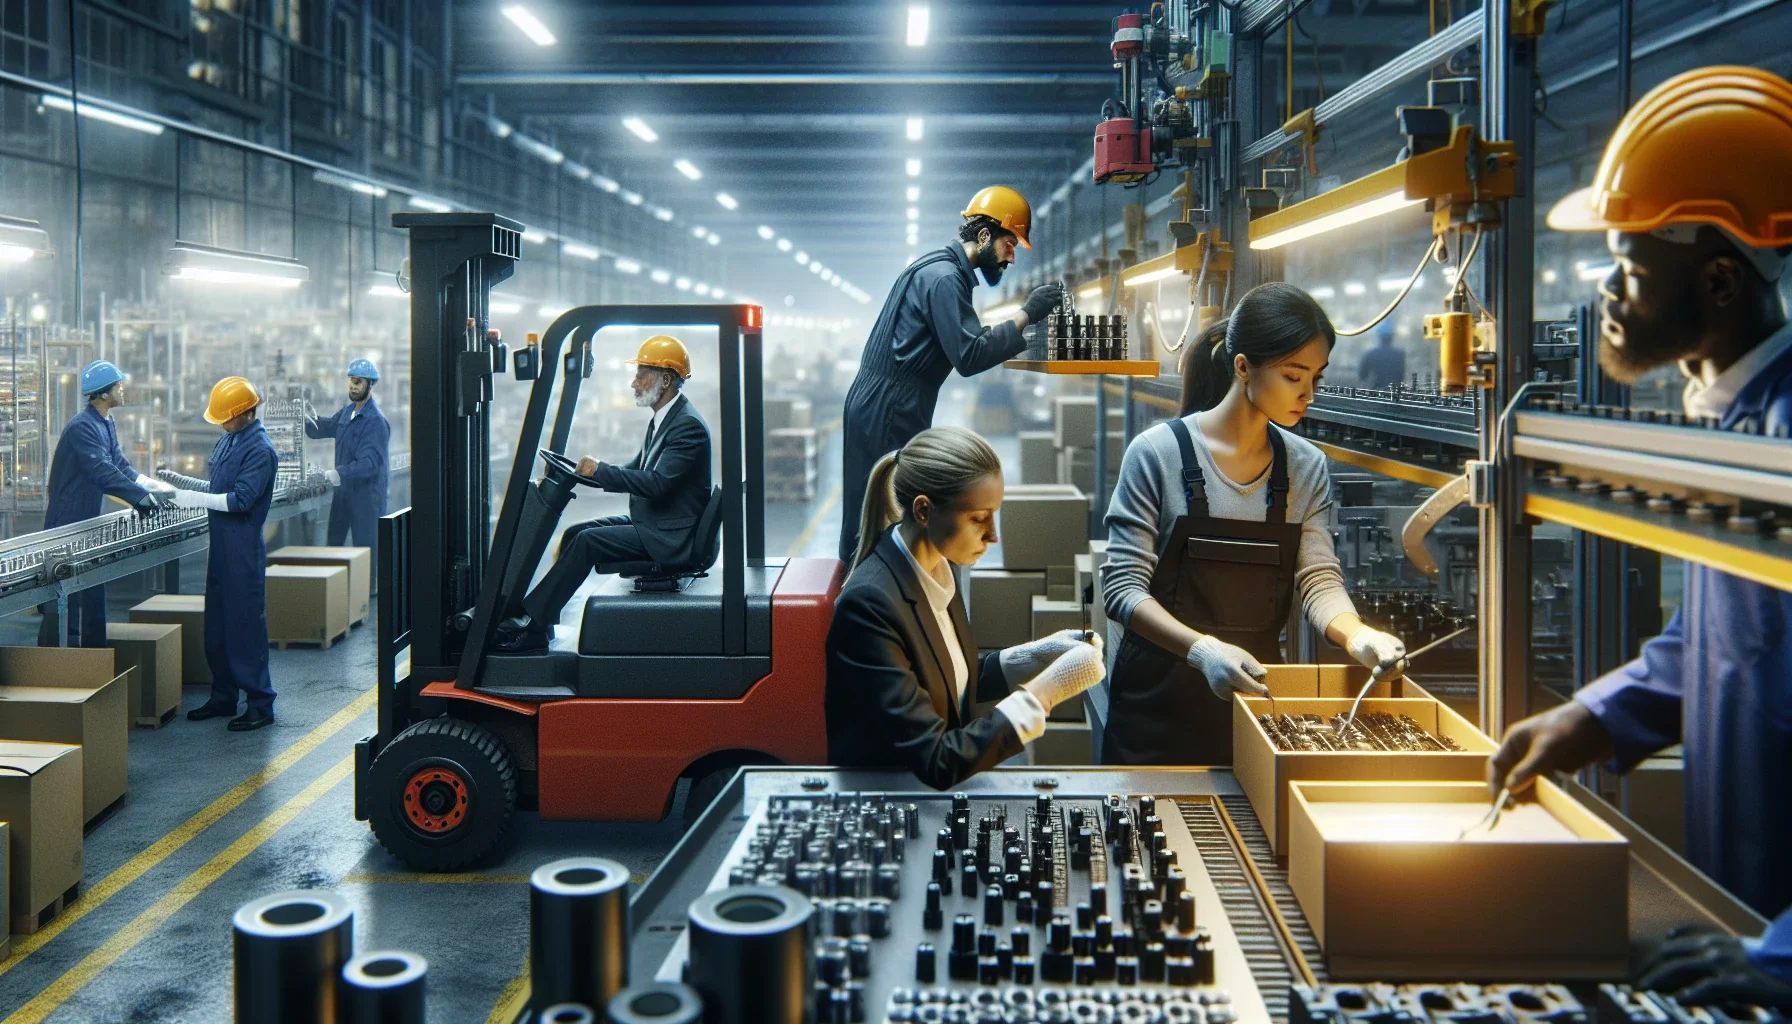 Workers in a light industrial setting